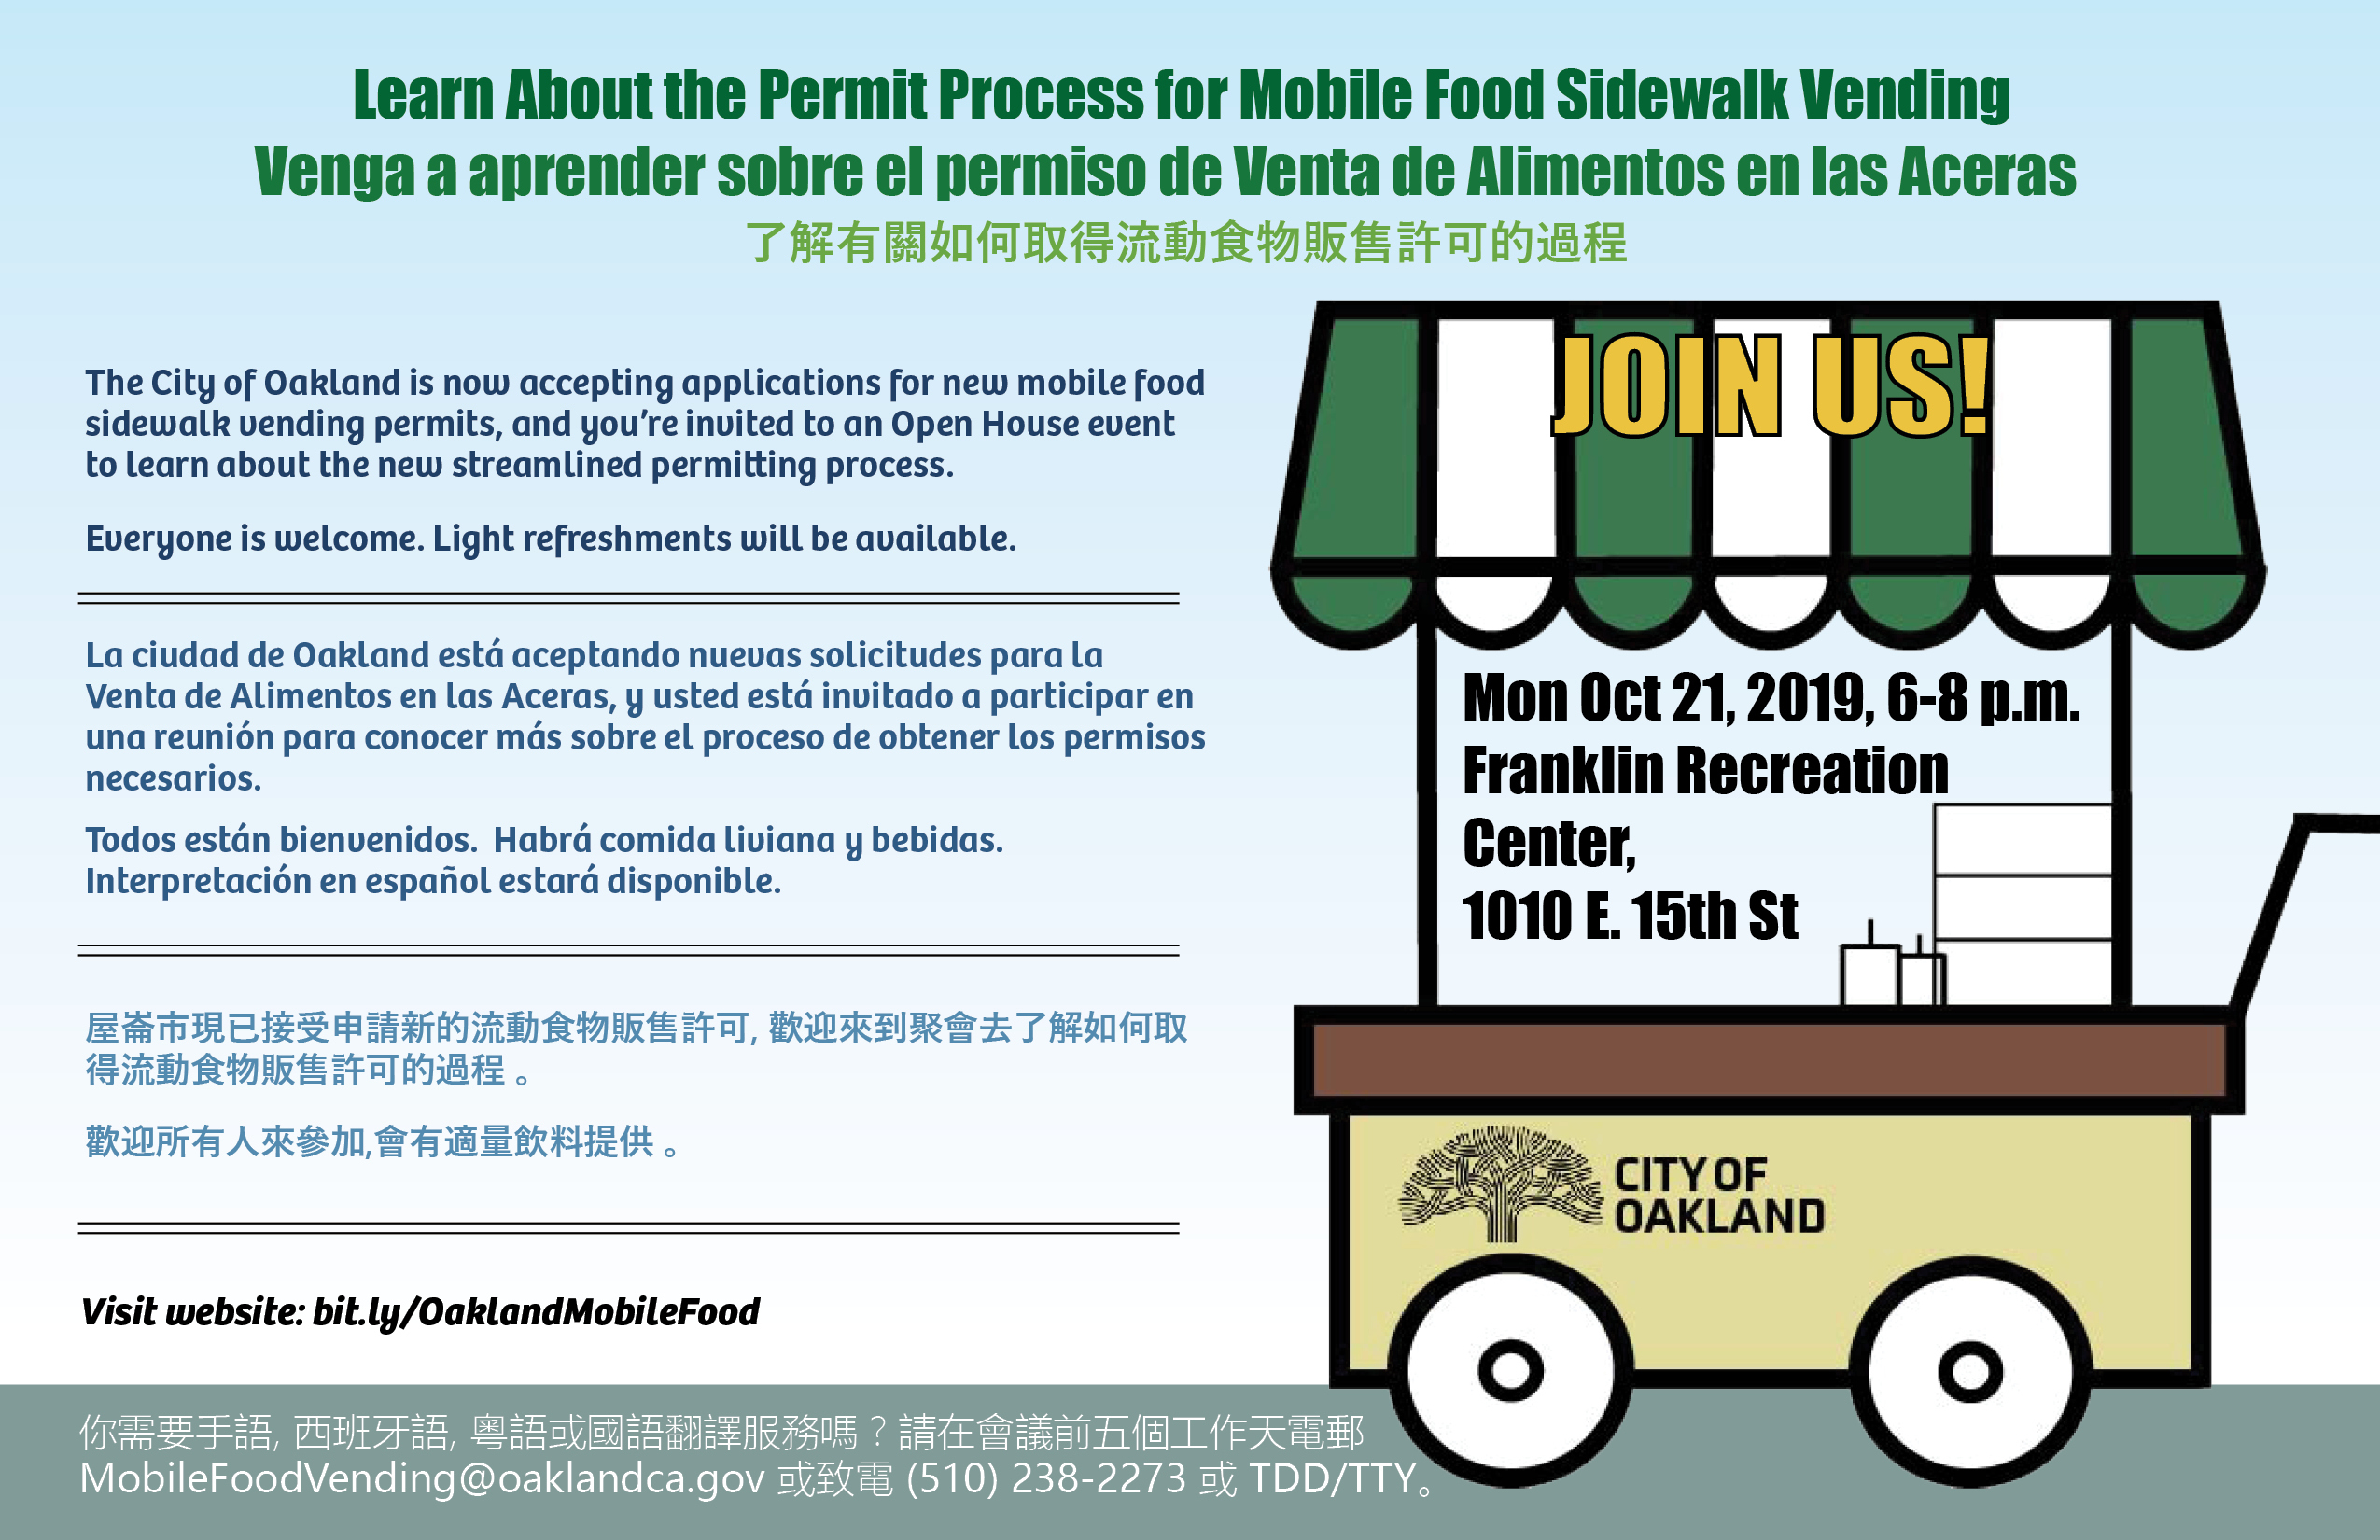 Monday, October 21, 2019: Learn About Permits for Sidewalk Mobile Food Vending in Oakland Image